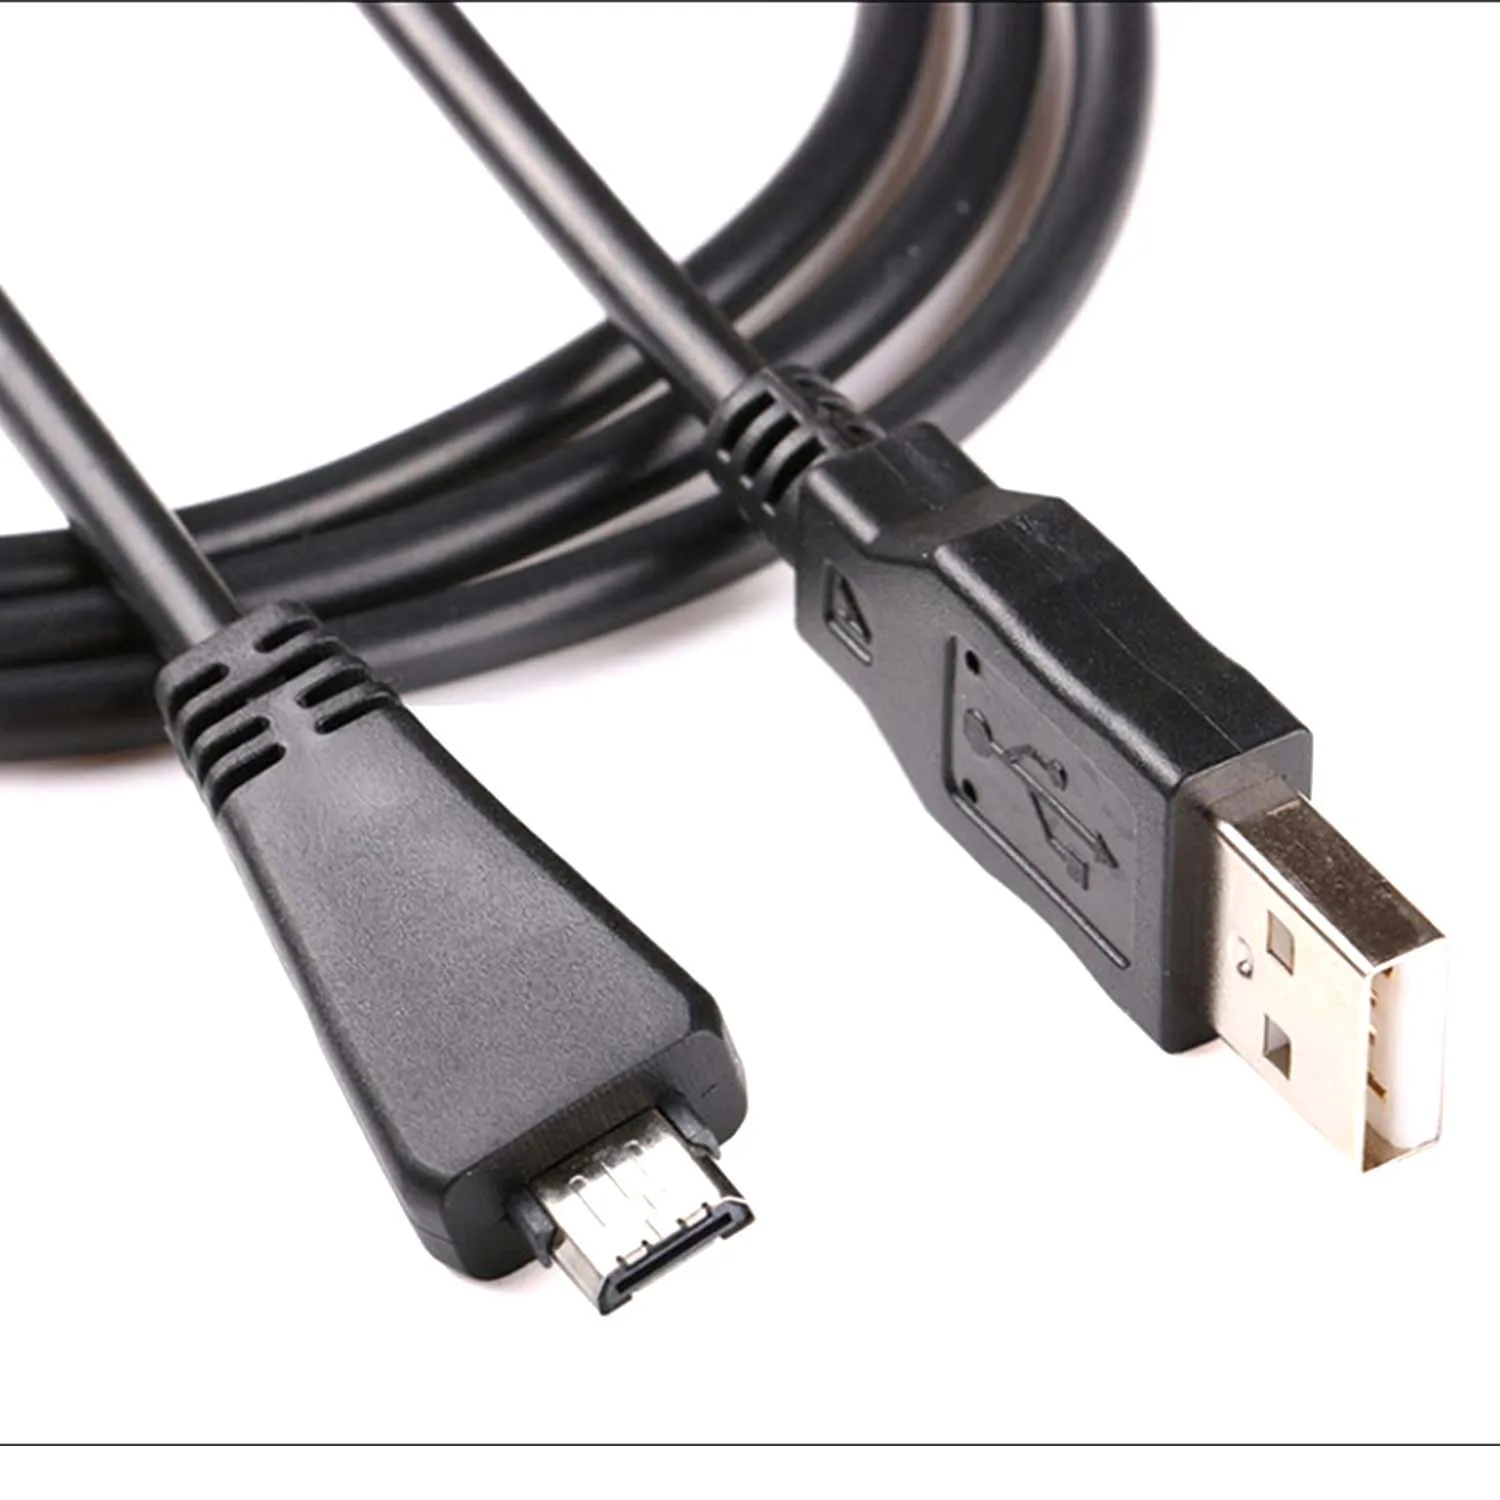 

USB DATA cable for Sony VMC-MD3 DSC-TX10/B TX10/P TX100 TX100/V TX100/R TX100/B DSC-HX7 HX7V HX7/W HX7/B HX7/L HX7/R HX9 HX9V